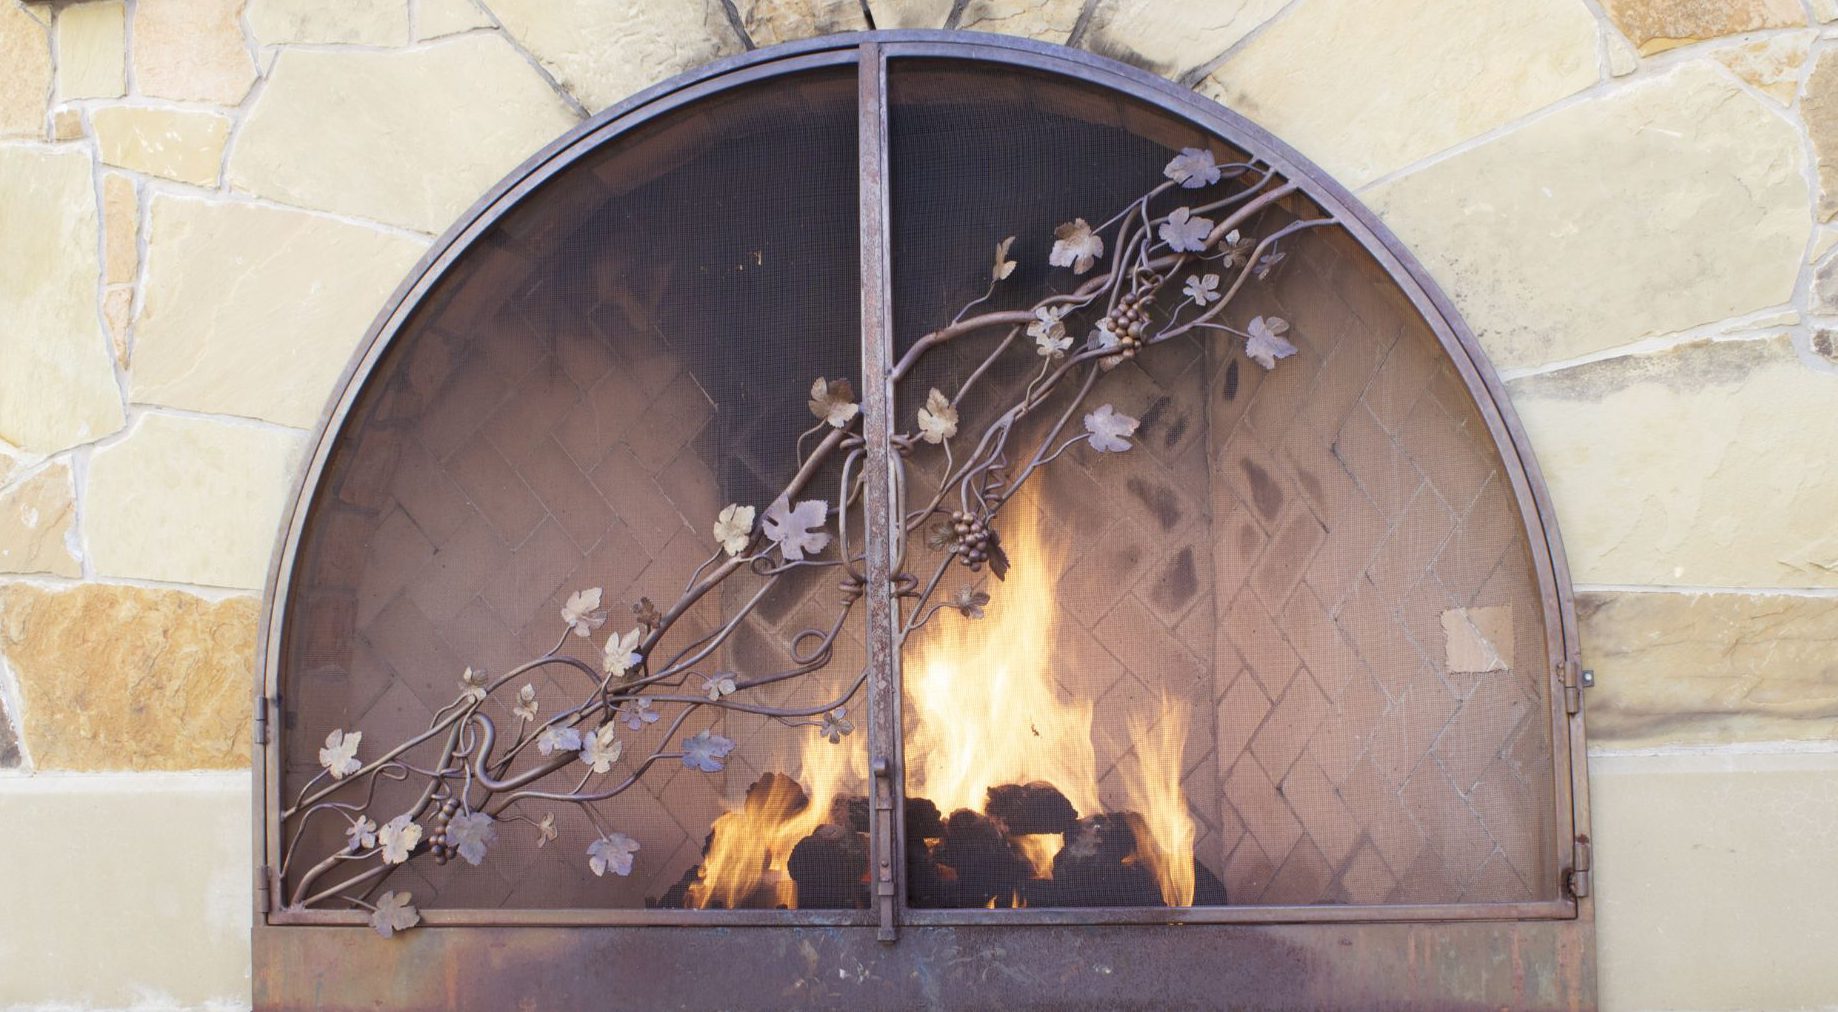 Global Hearth Market Outlook, Opportunities And Strategies – Includes Hearth Market Size